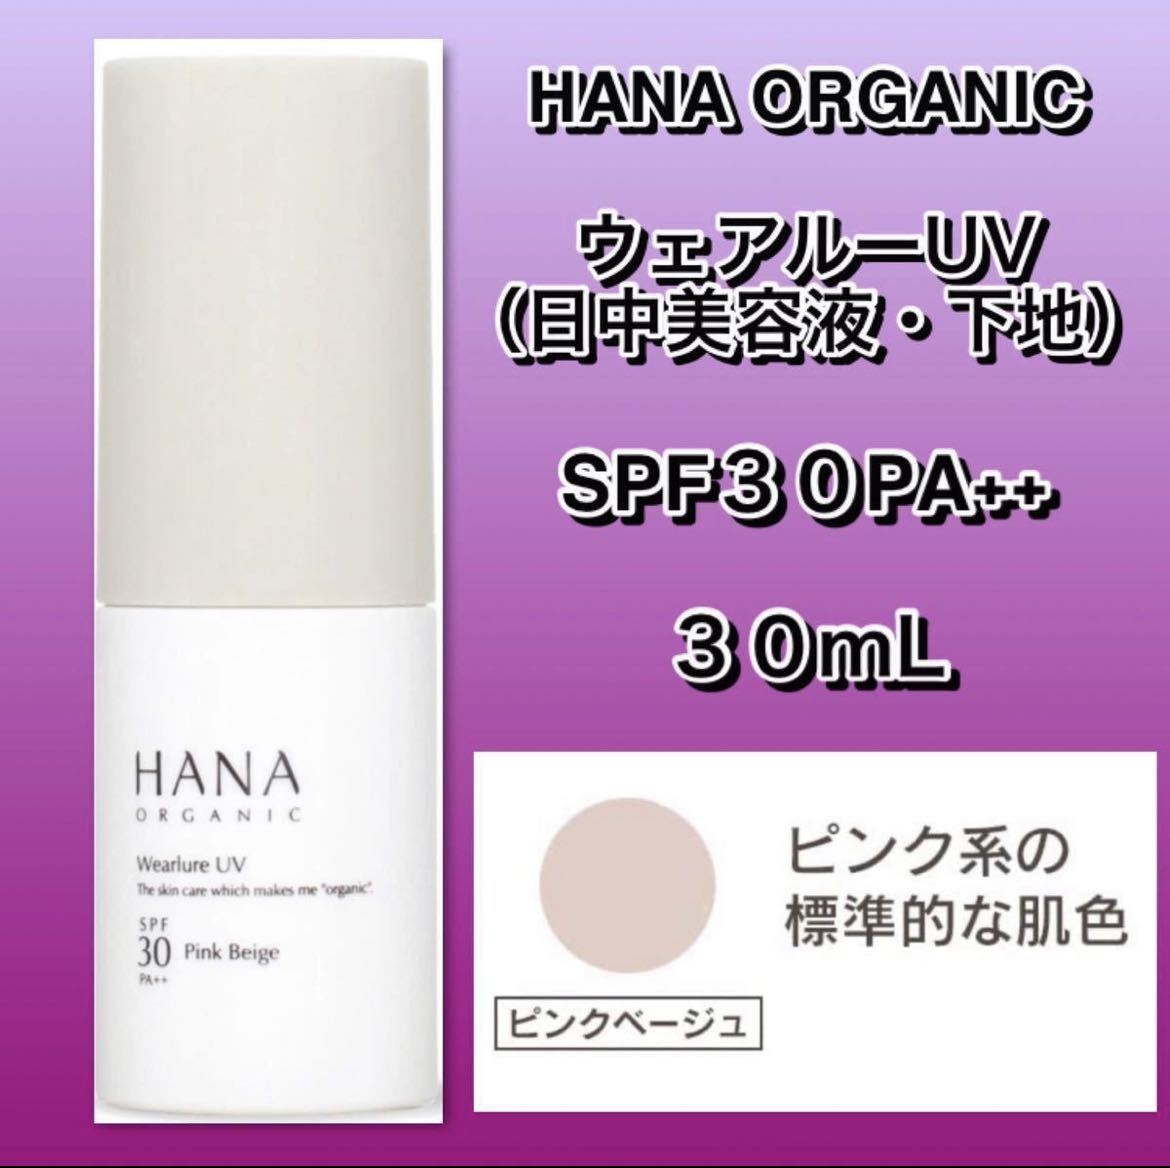 HANA organic ハナオーガニック ウェアルーUV （日焼け止めベース） ＃ピンクベージュ 30mL SPF30・PA++ product  details | Proxy bidding and ordering service for auctions and shopping  within Japan and the United States - Get the latest news on